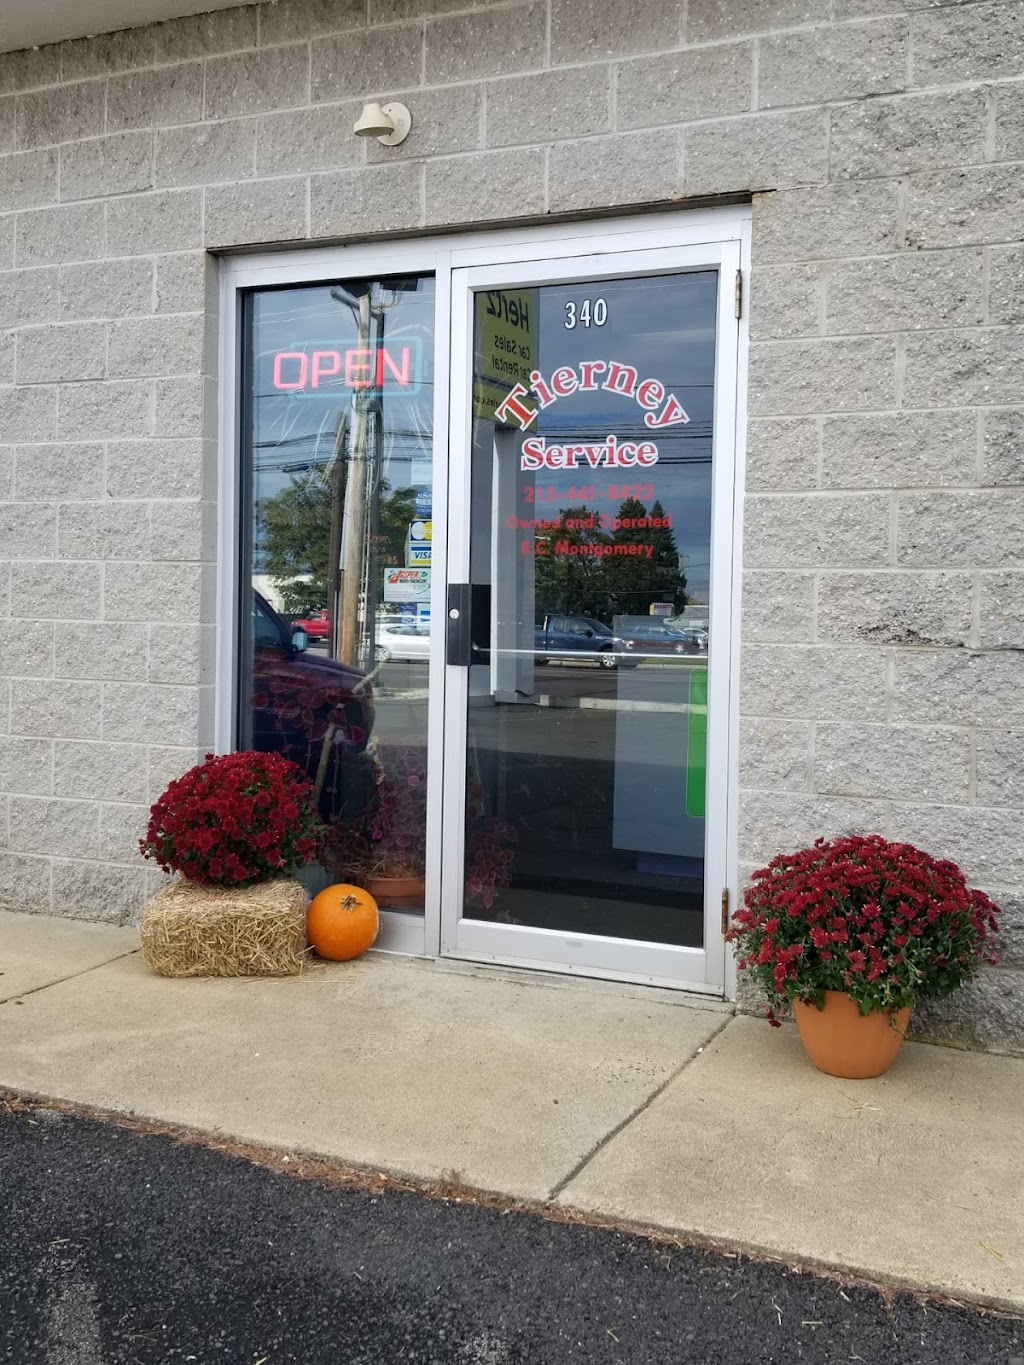 Tierney Auto Service | 330 West Street Rd, Warminster, PA 18974 | Phone: (215) 441-8422